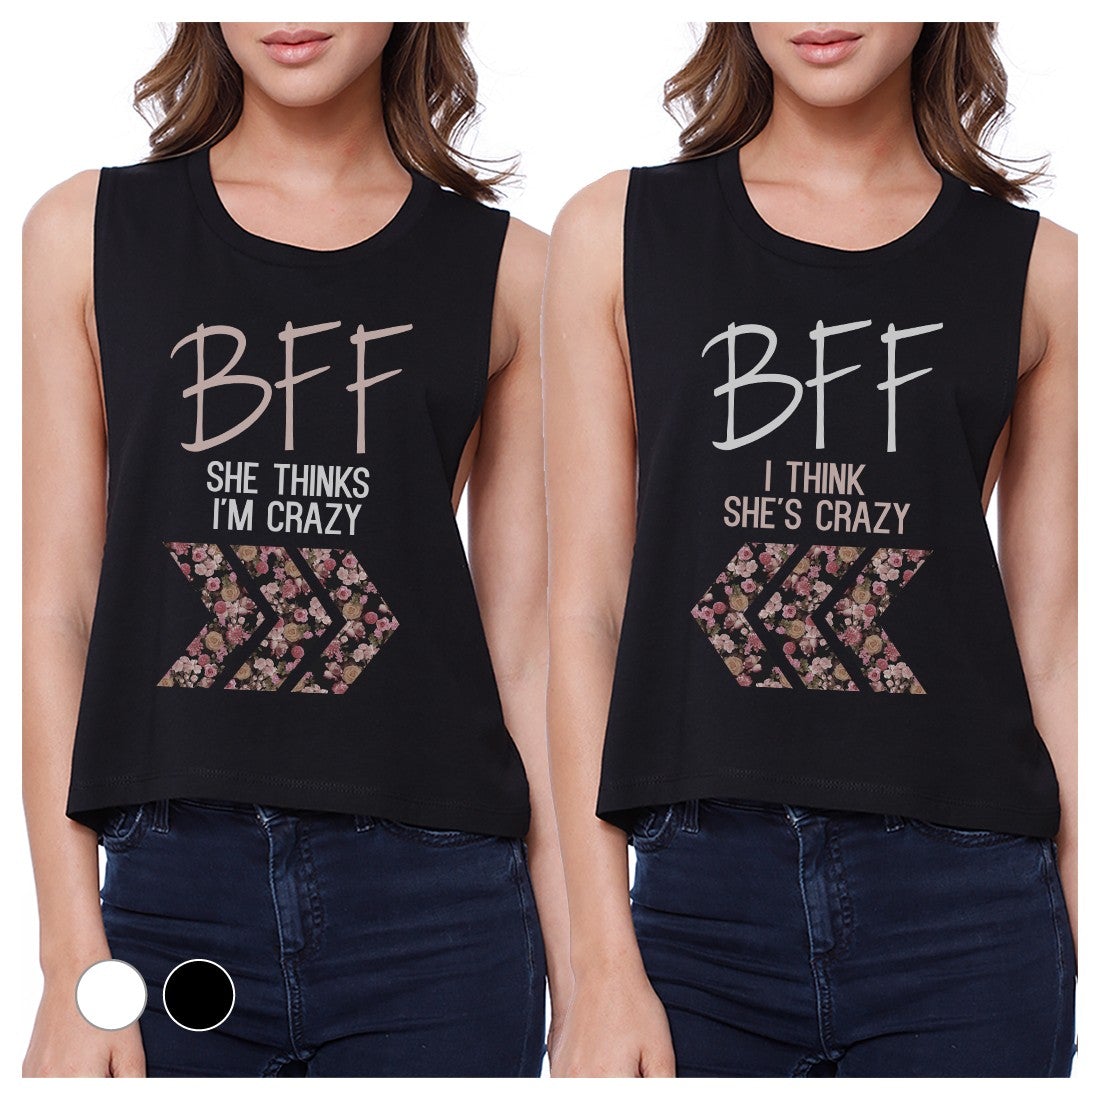 BFF Floral Crazy BFF Matching Crop Top Womens Graphic Cropped Tanks Black